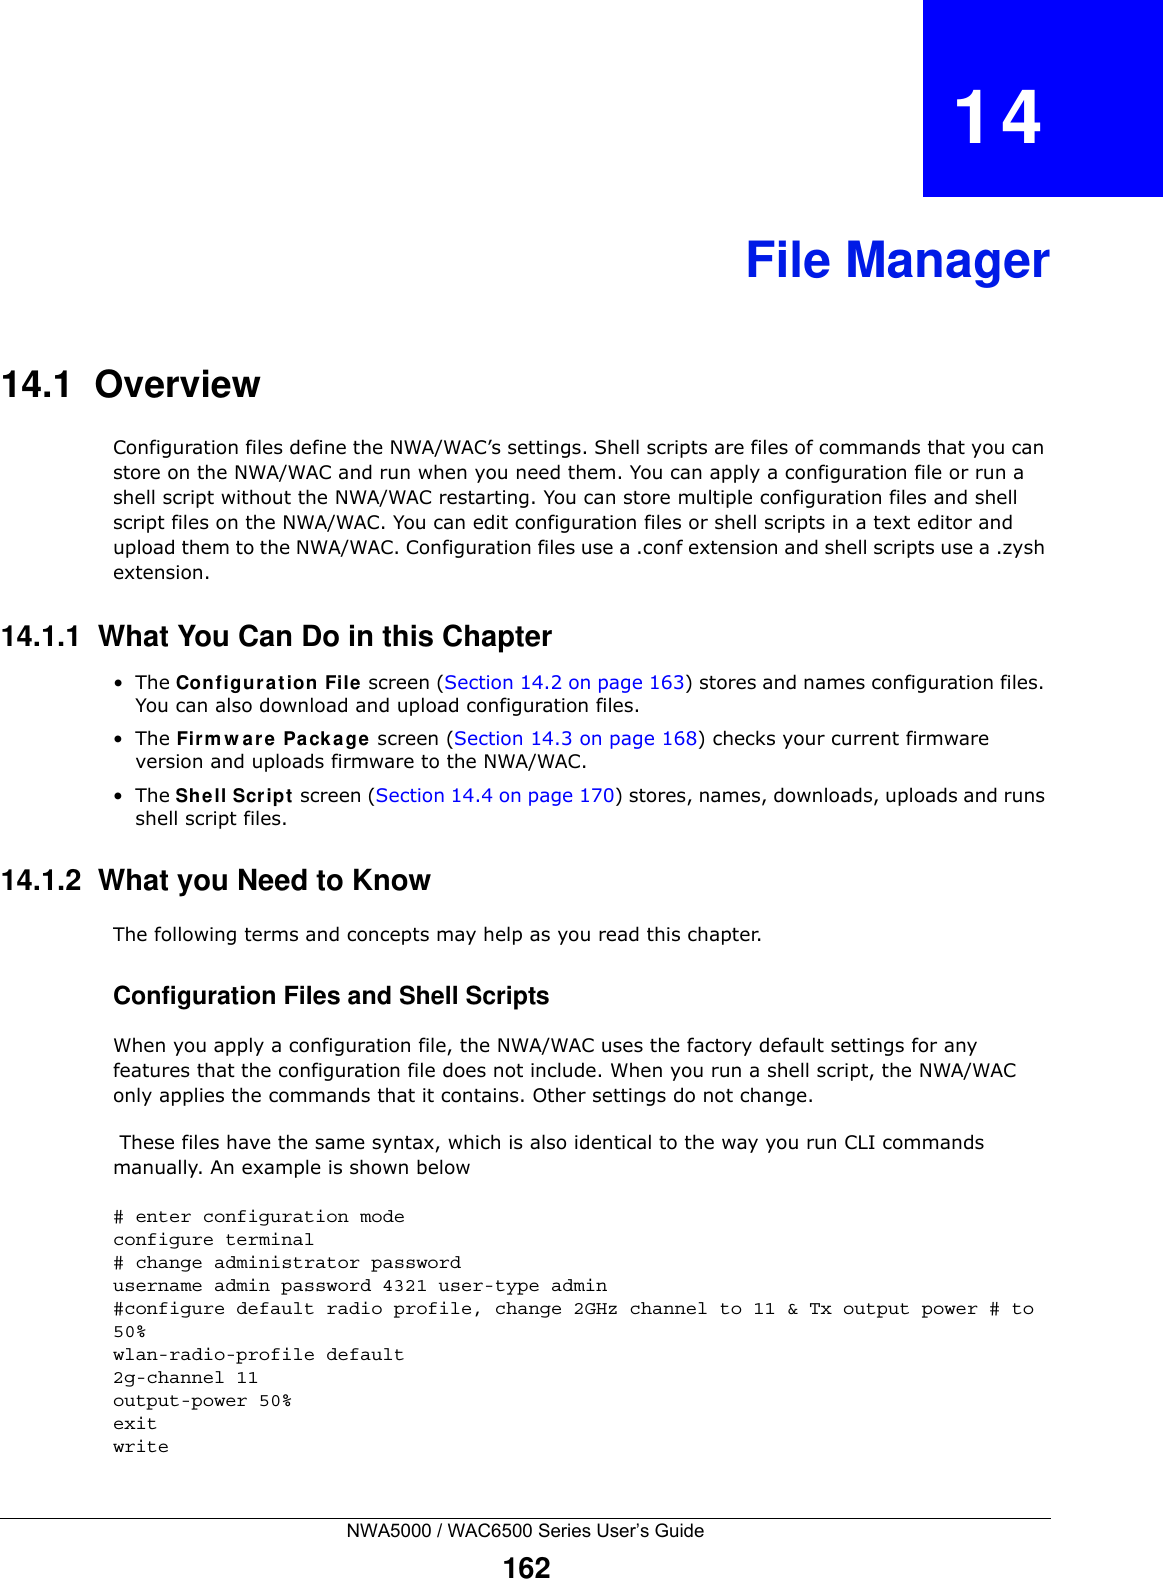 NWA5000 / WAC6500 Series User’s Guide162CHAPTER   14File Manager14.1  OverviewConfiguration files define the NWA/WAC’s settings. Shell scripts are files of commands that you can store on the NWA/WAC and run when you need them. You can apply a configuration file or run a shell script without the NWA/WAC restarting. You can store multiple configuration files and shell script files on the NWA/WAC. You can edit configuration files or shell scripts in a text editor and upload them to the NWA/WAC. Configuration files use a .conf extension and shell scripts use a .zysh extension.14.1.1  What You Can Do in this Chapter•The Configura tion File  screen (Section 14.2 on page 163) stores and names configuration files. You can also download and upload configuration files.•The Firm w a re  Pack age screen (Section 14.3 on page 168) checks your current firmware version and uploads firmware to the NWA/WAC.•The Shell Script screen (Section 14.4 on page 170) stores, names, downloads, uploads and runs shell script files. 14.1.2  What you Need to KnowThe following terms and concepts may help as you read this chapter.Configuration Files and Shell ScriptsWhen you apply a configuration file, the NWA/WAC uses the factory default settings for any features that the configuration file does not include. When you run a shell script, the NWA/WAC only applies the commands that it contains. Other settings do not change. These files have the same syntax, which is also identical to the way you run CLI commands manually. An example is shown below# enter configuration modeconfigure terminal# change administrator passwordusername admin password 4321 user-type admin#configure default radio profile, change 2GHz channel to 11 &amp; Tx output power # to 50%wlan-radio-profile default2g-channel 11output-power 50%exitwrite